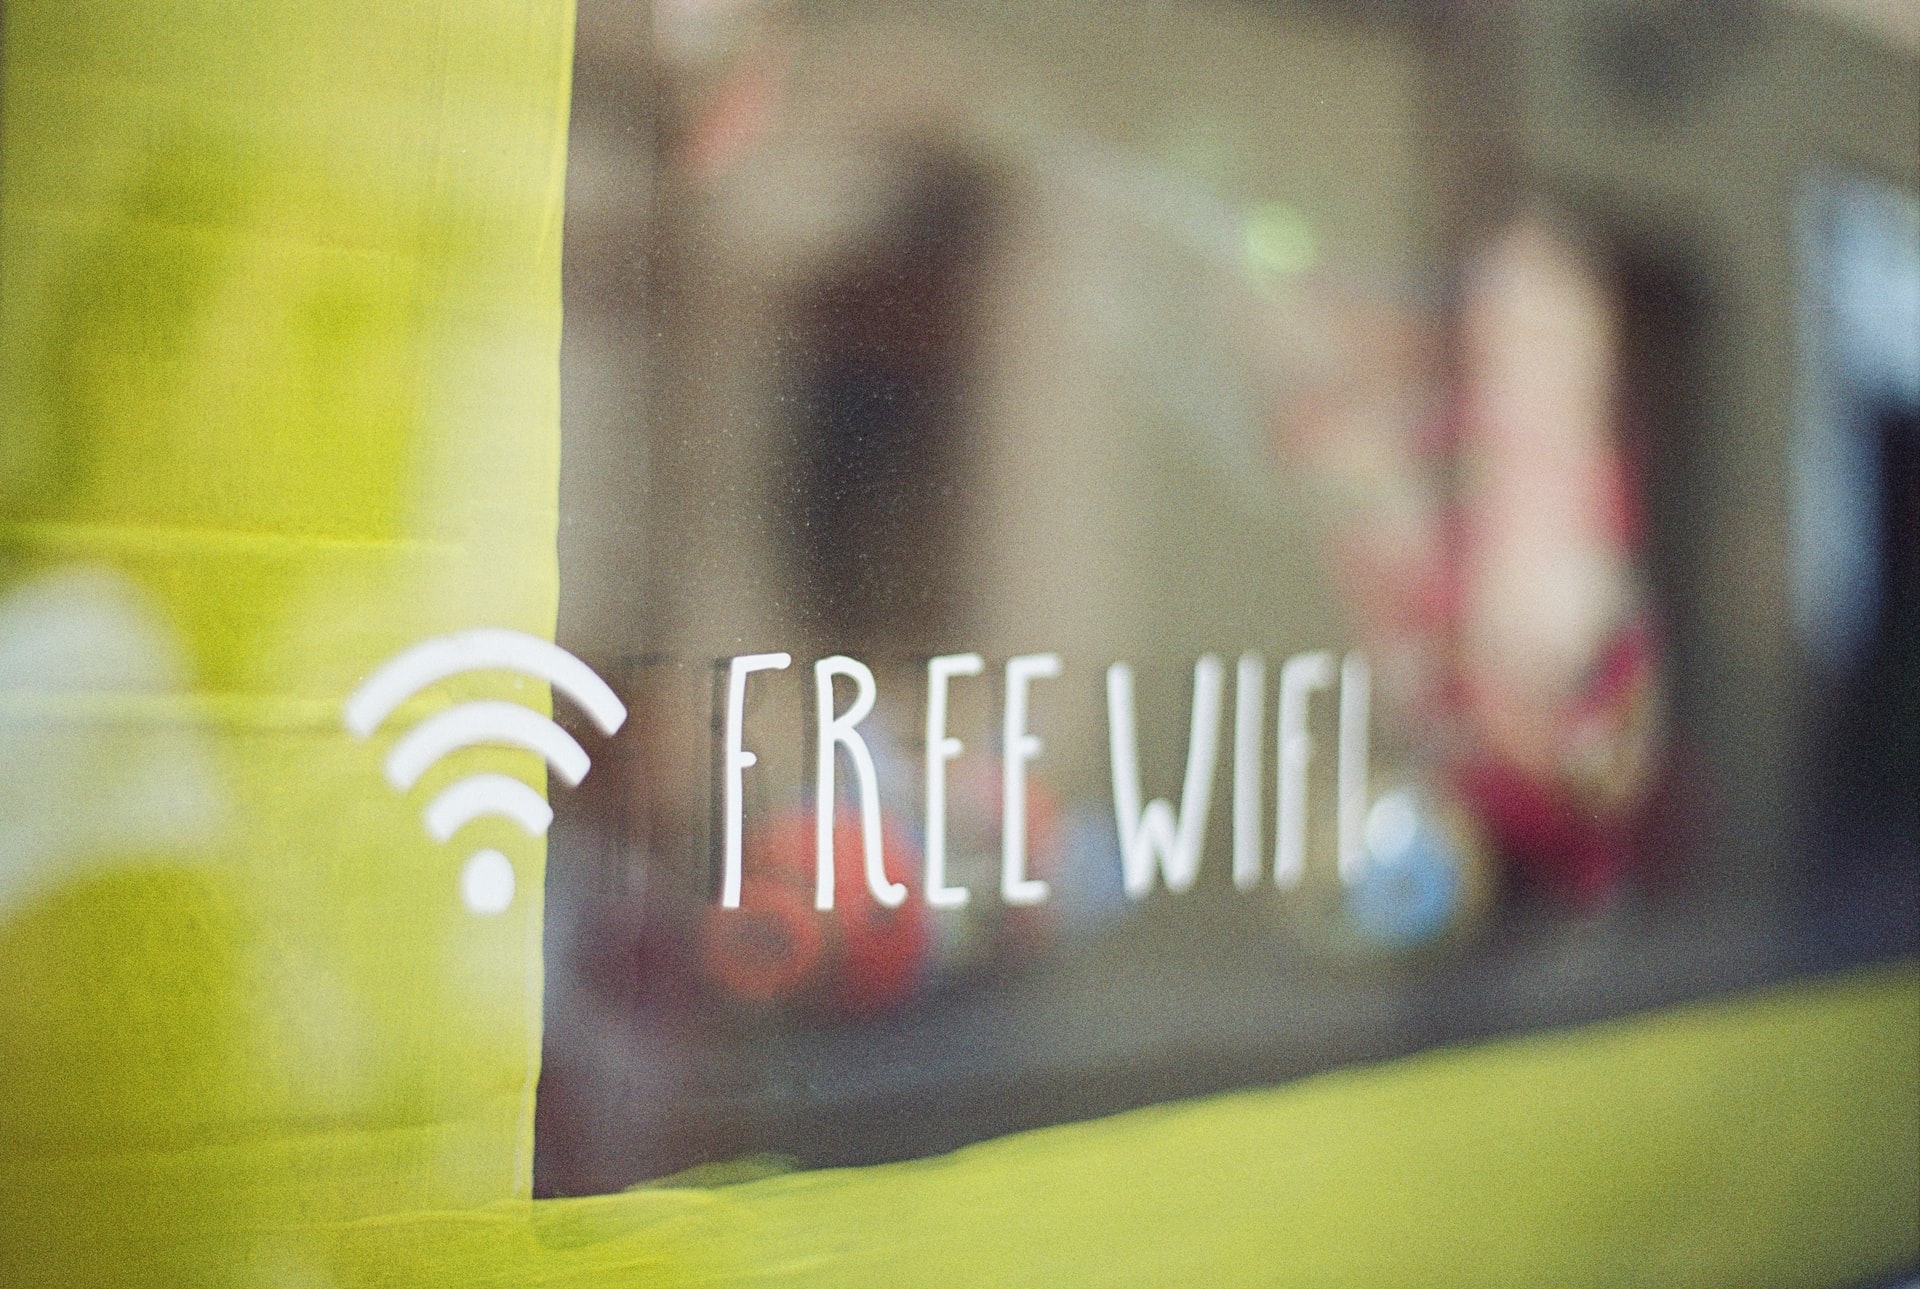 WPSApp - How to Find Free WiFi with this App